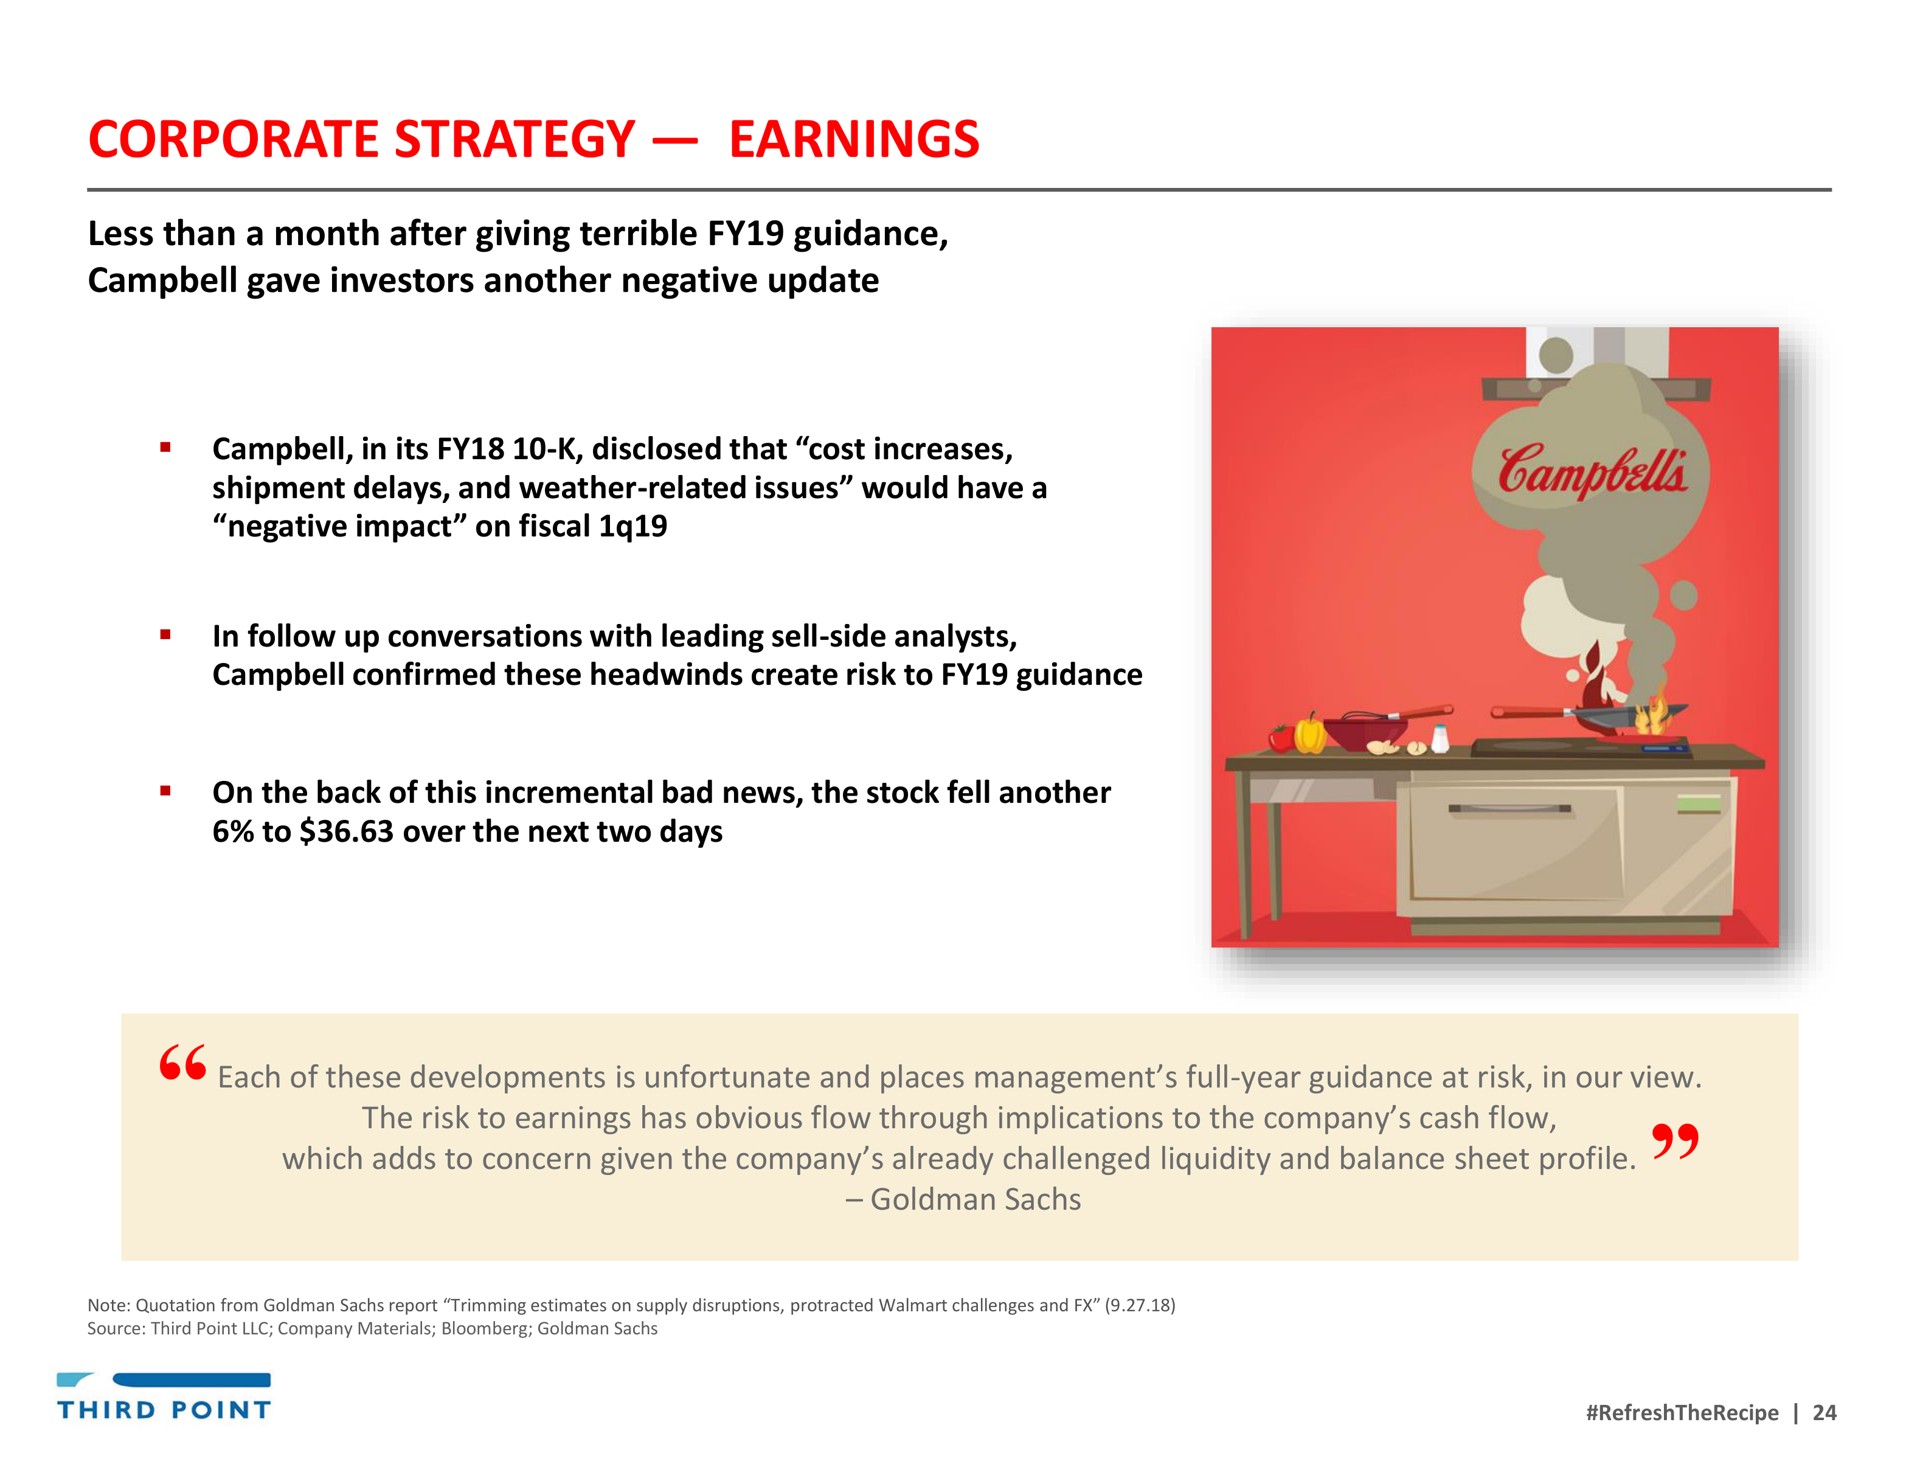 corporate strategy earnings | Third Point Management